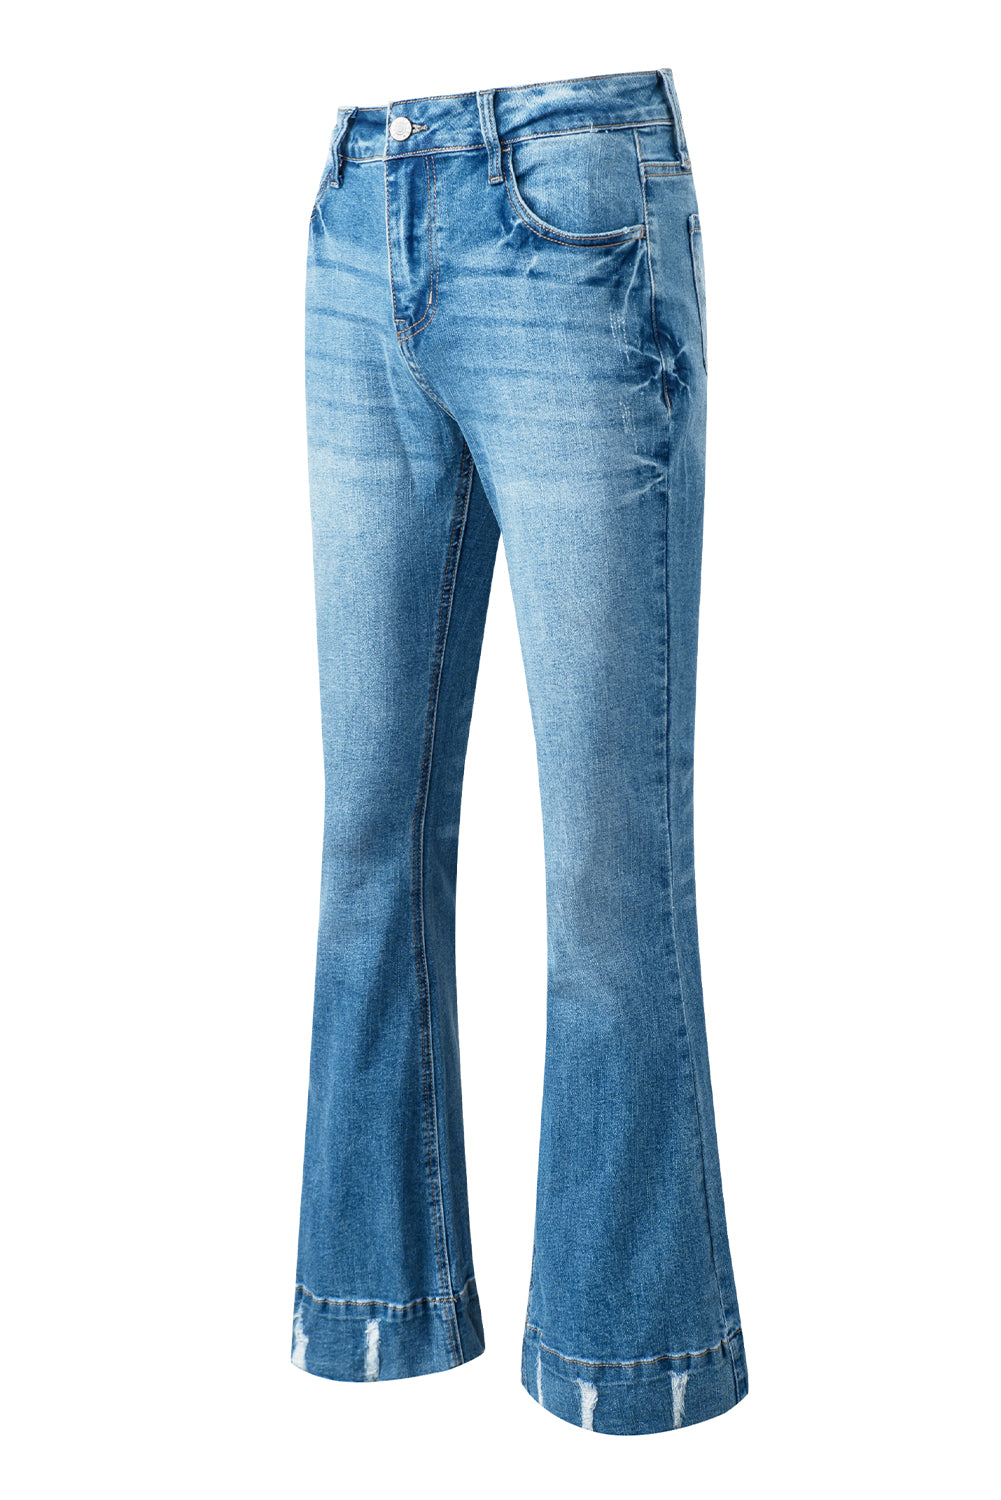 - Sky Blue Slight Distressed Medium Wash Flare Jeans - women's jeans at TFC&H Co.